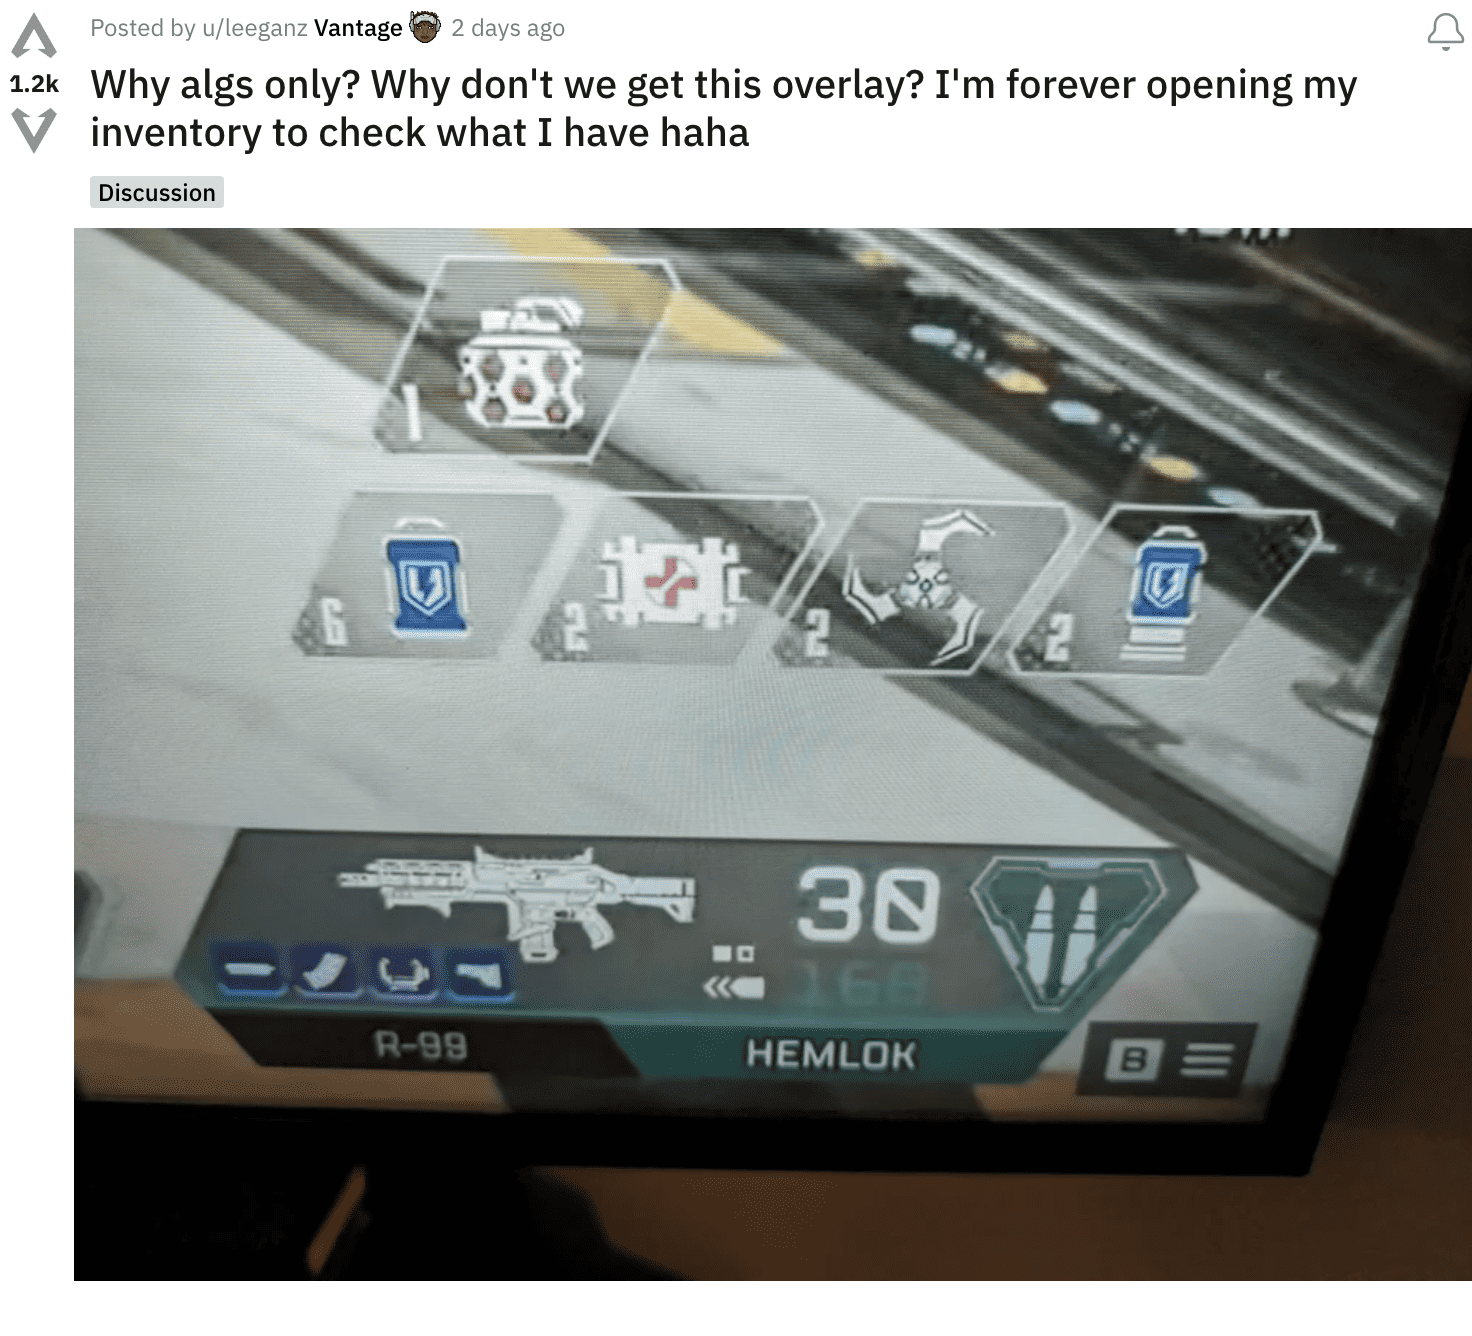 A TV screen displaying Apex Legends UI feature with a gun on it gets discussed by gamers.